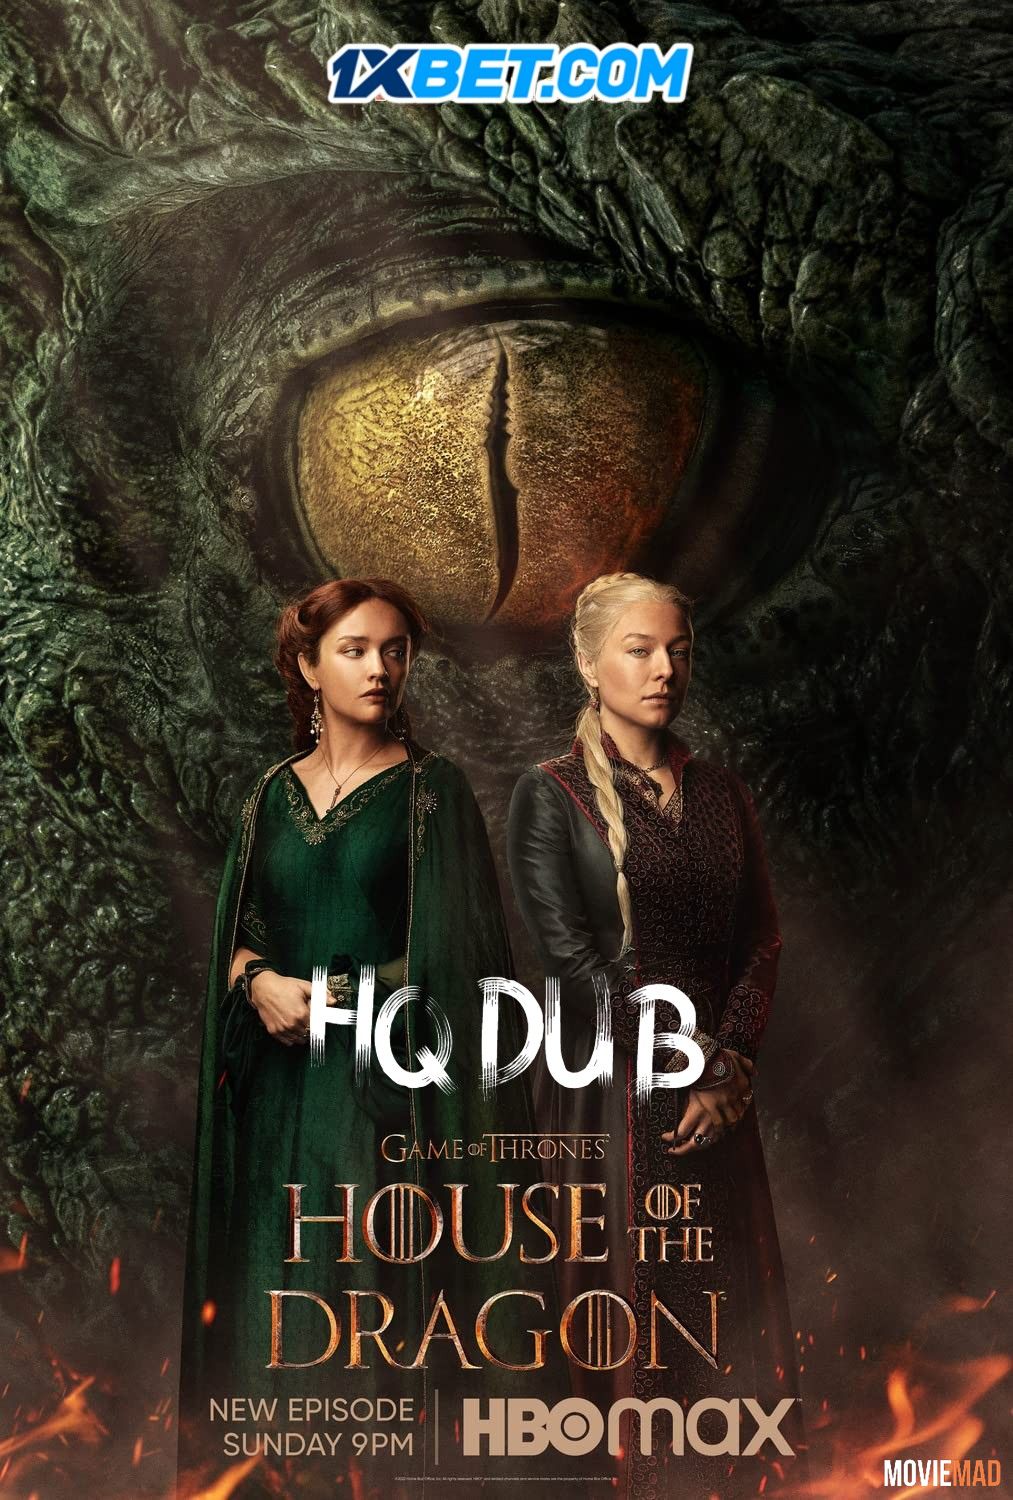 full moviesHouse Of The Dragon S01E09 (2022) Hindi (Voice Over) Dubbed HBOMAX HDRip 1080p 720p 480p